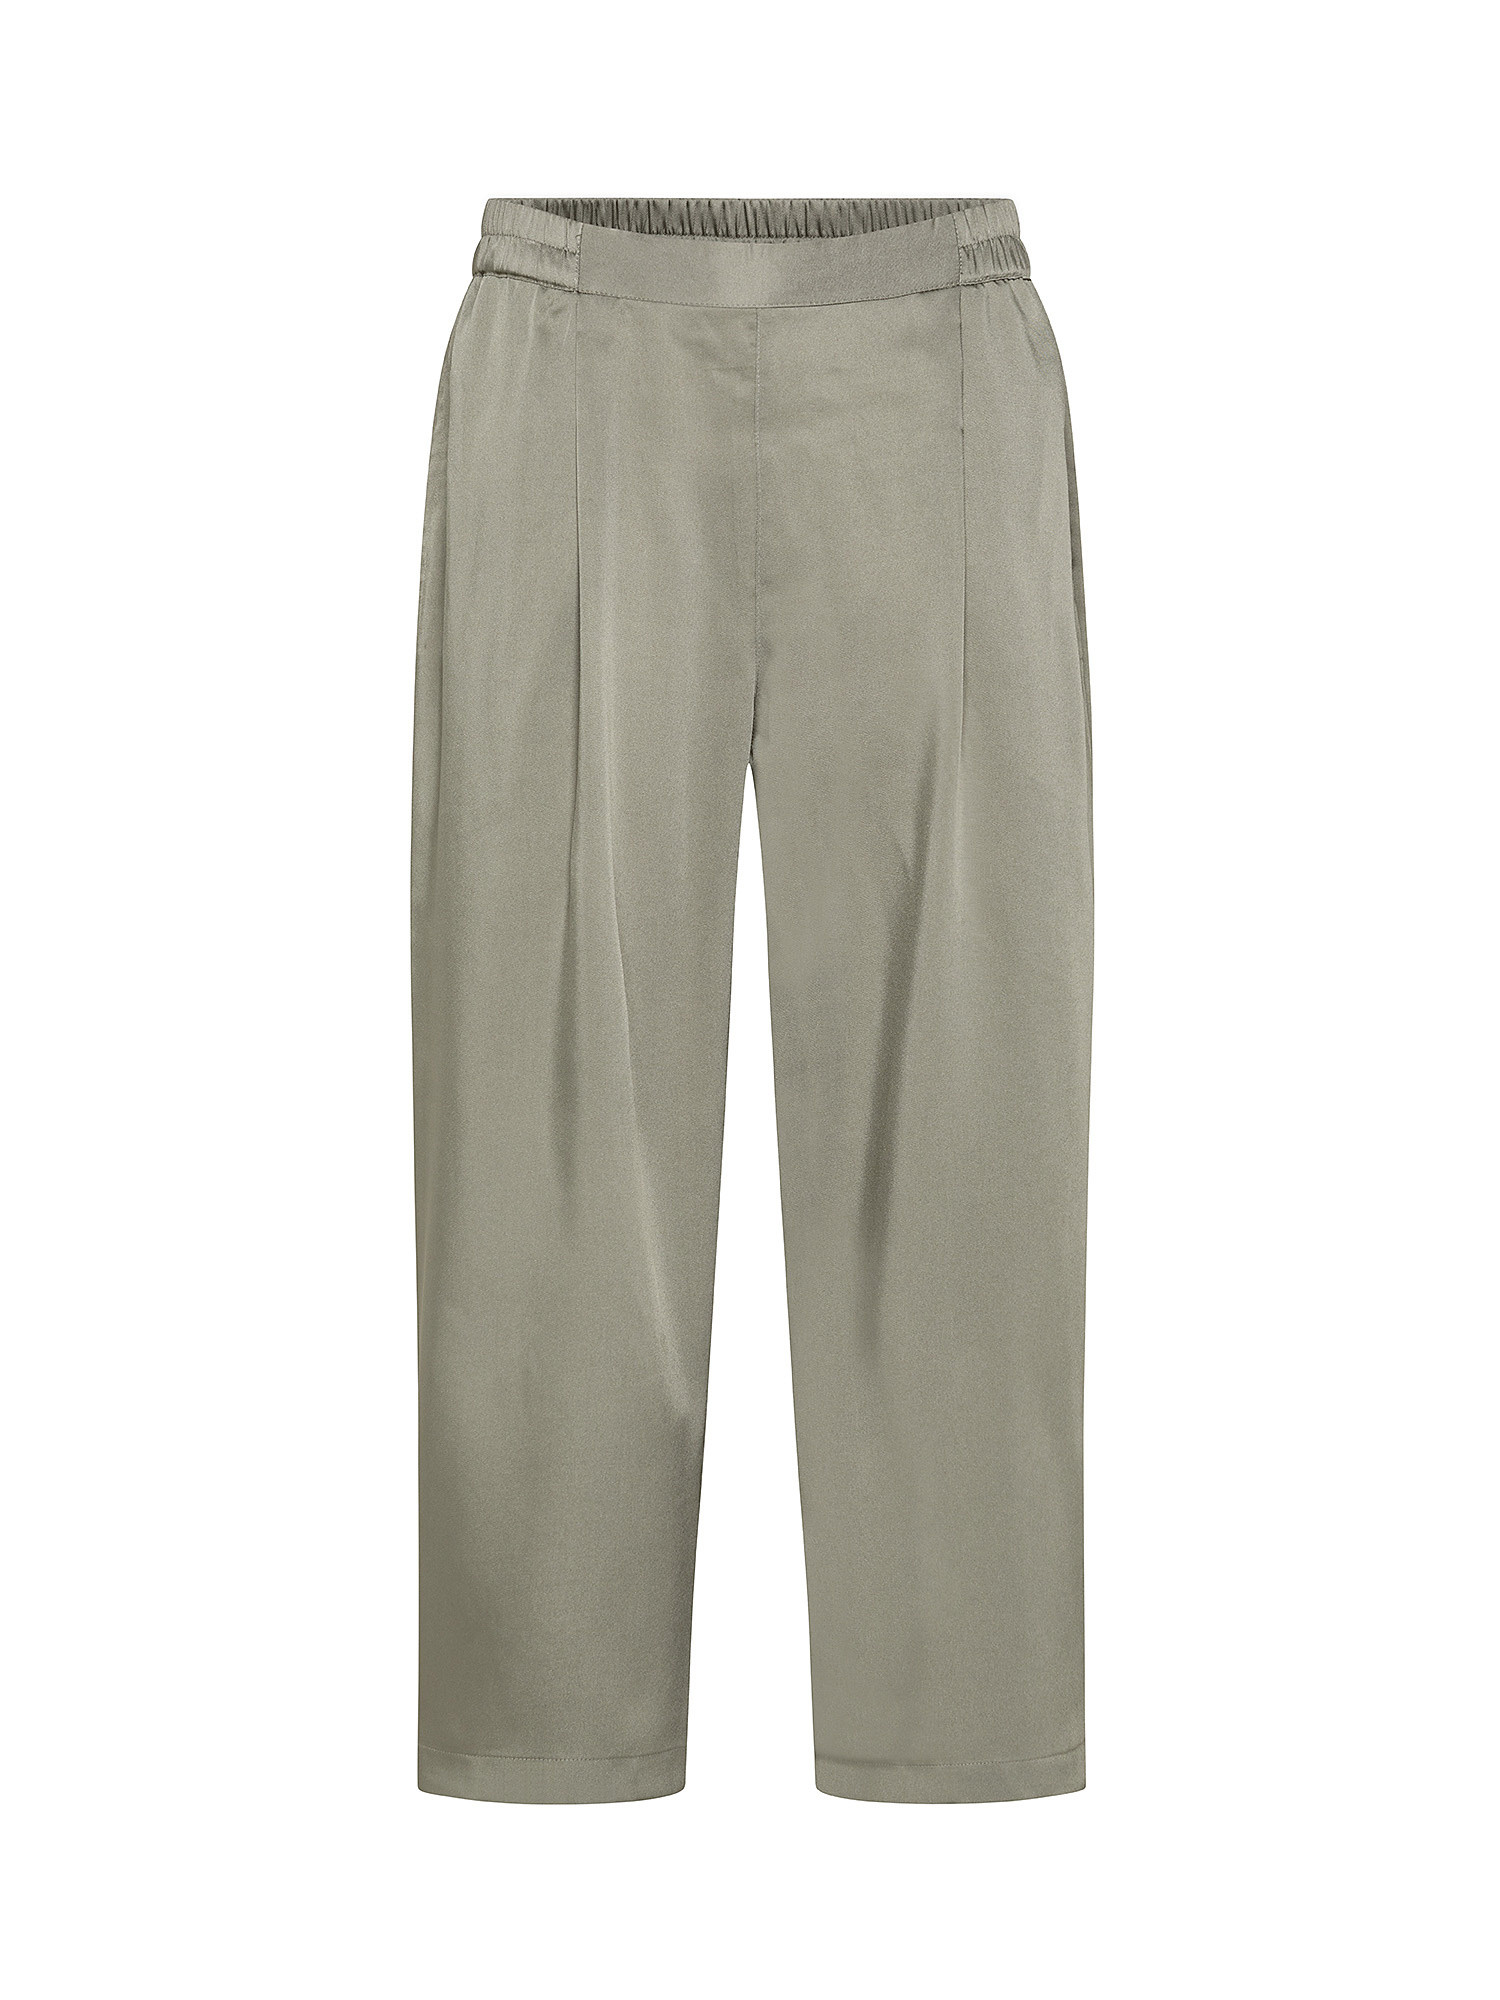 Wide leg trousers, Grey, large image number 0